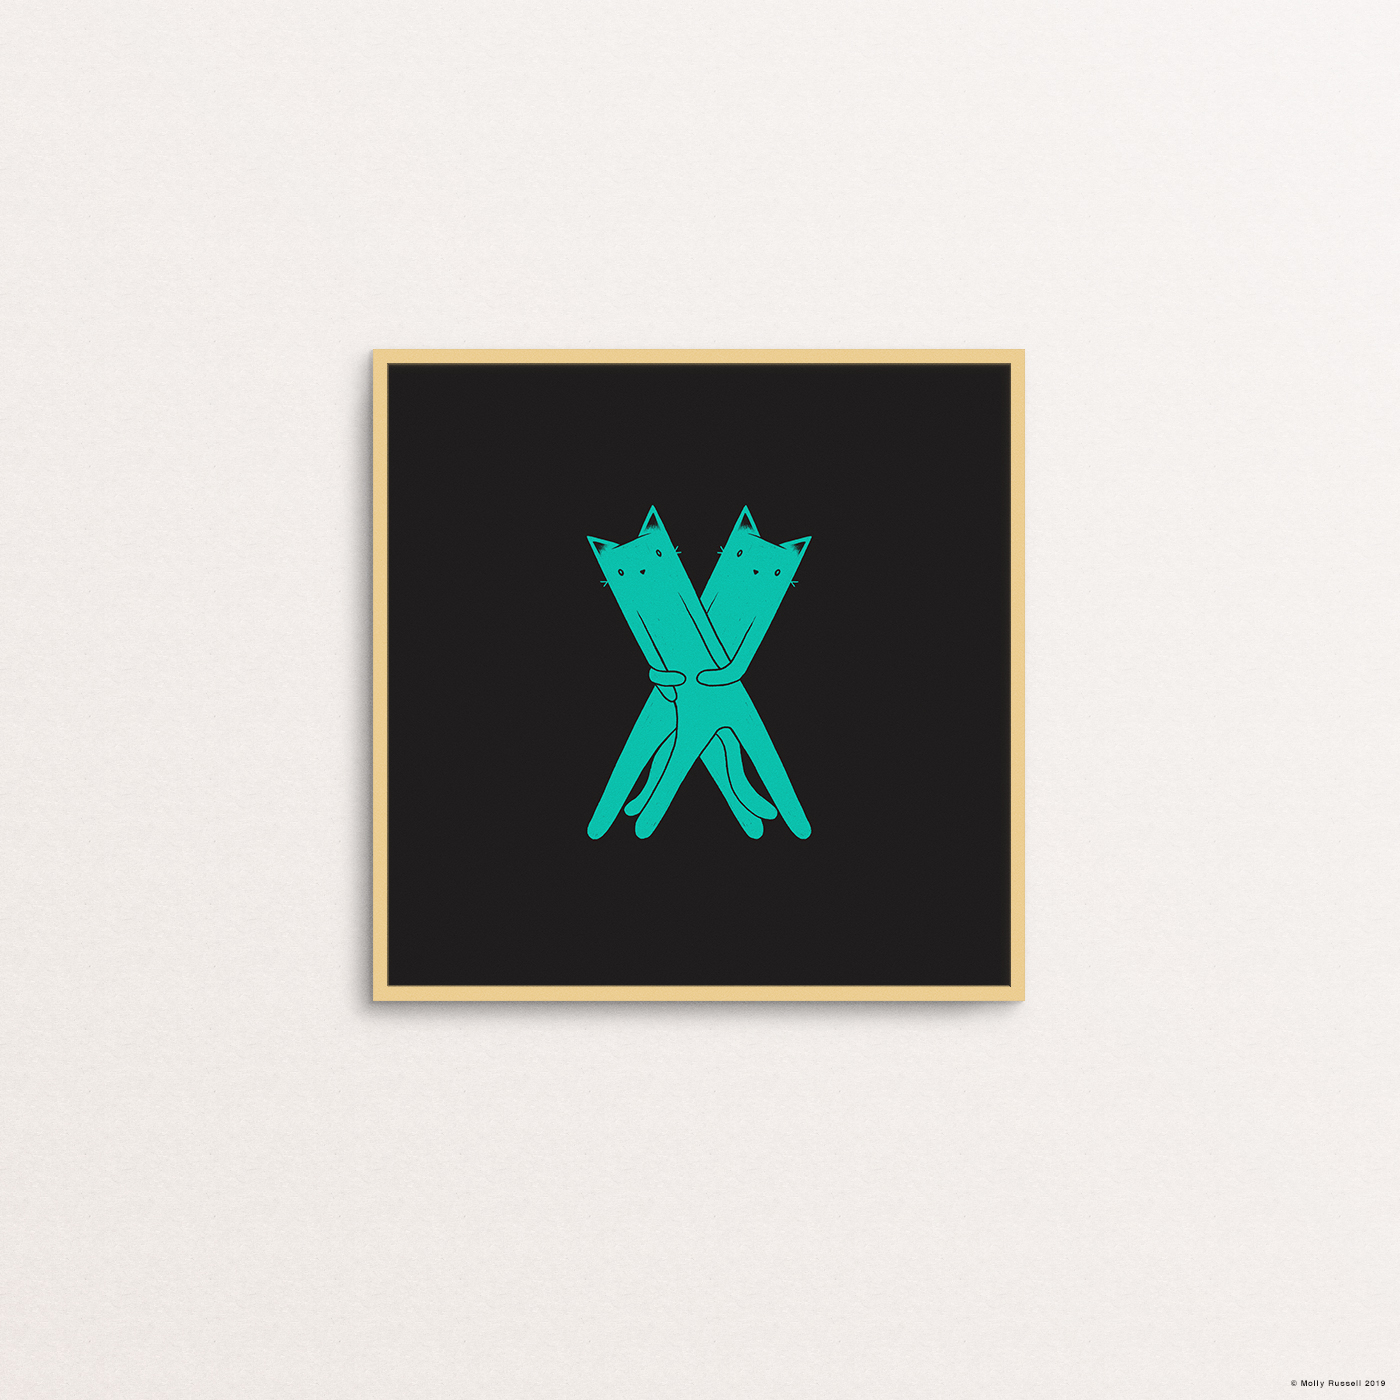 X is for Xavier.